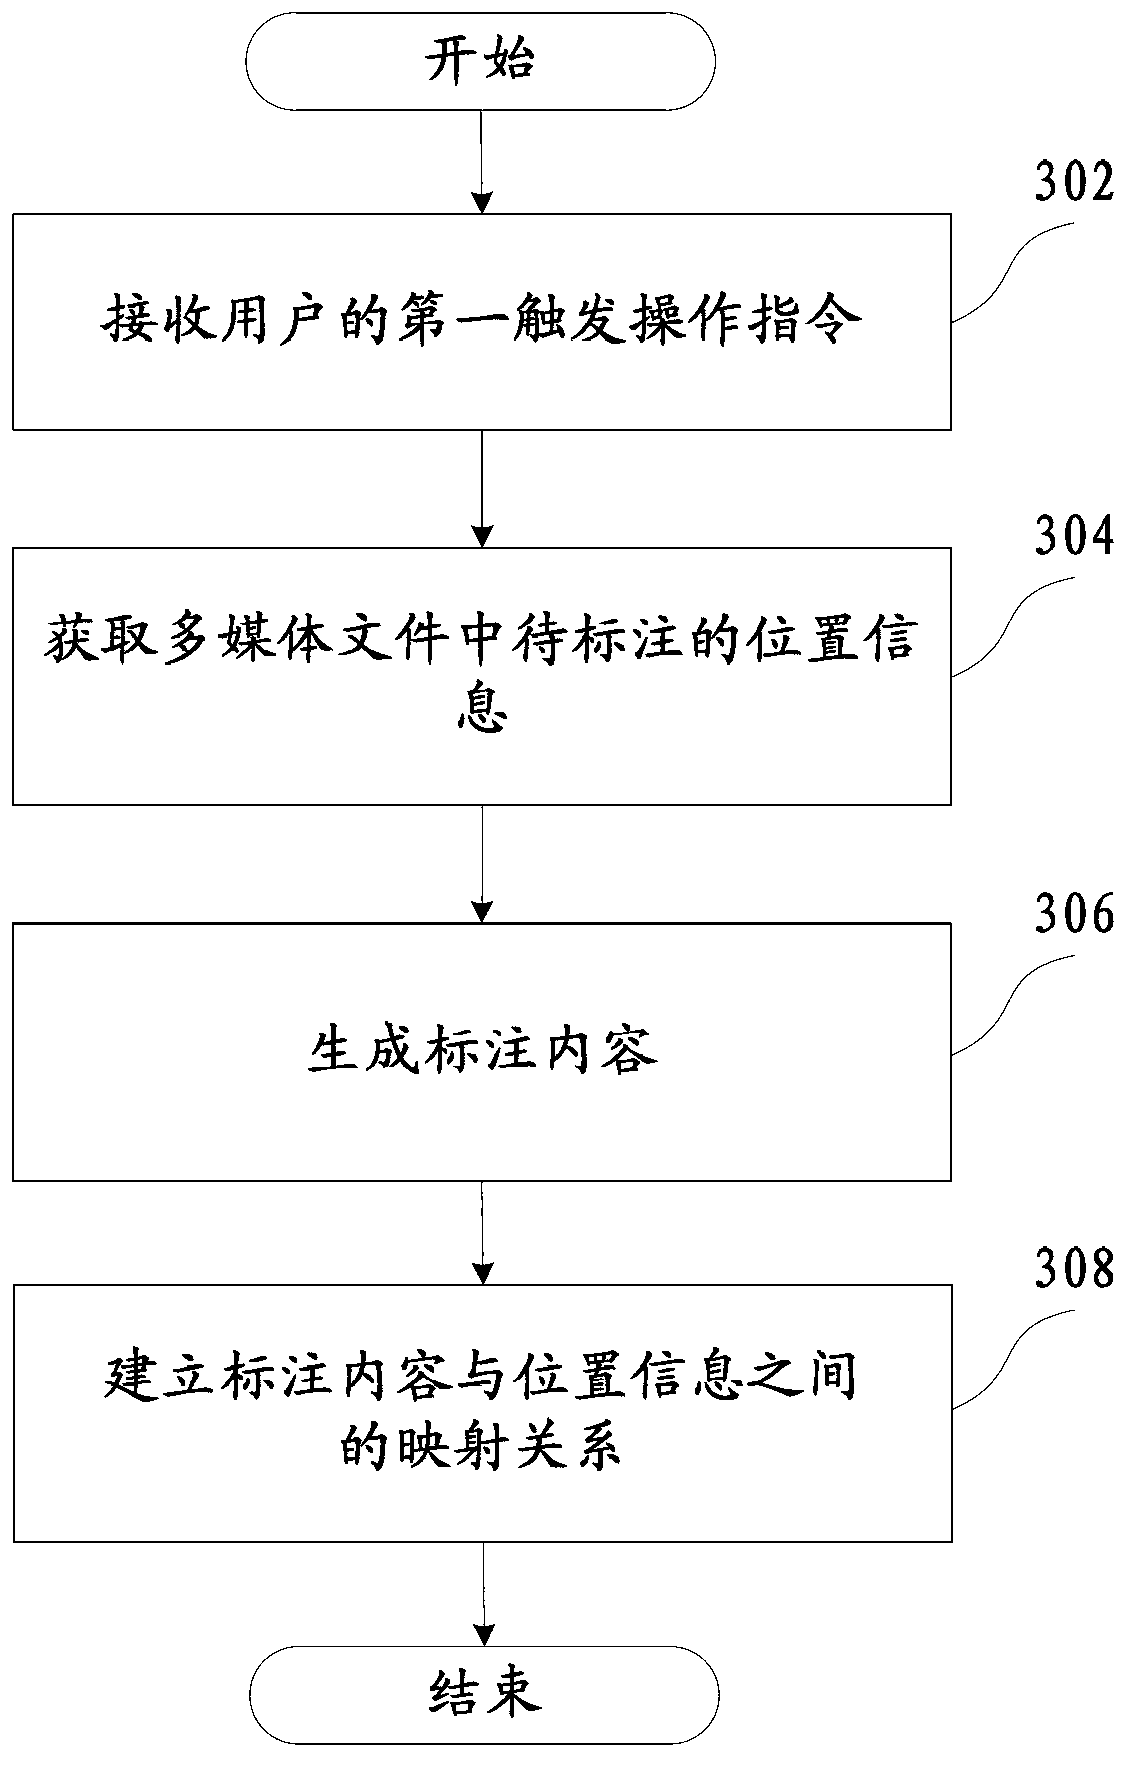 Method and device for labeling and displaying multi-media files